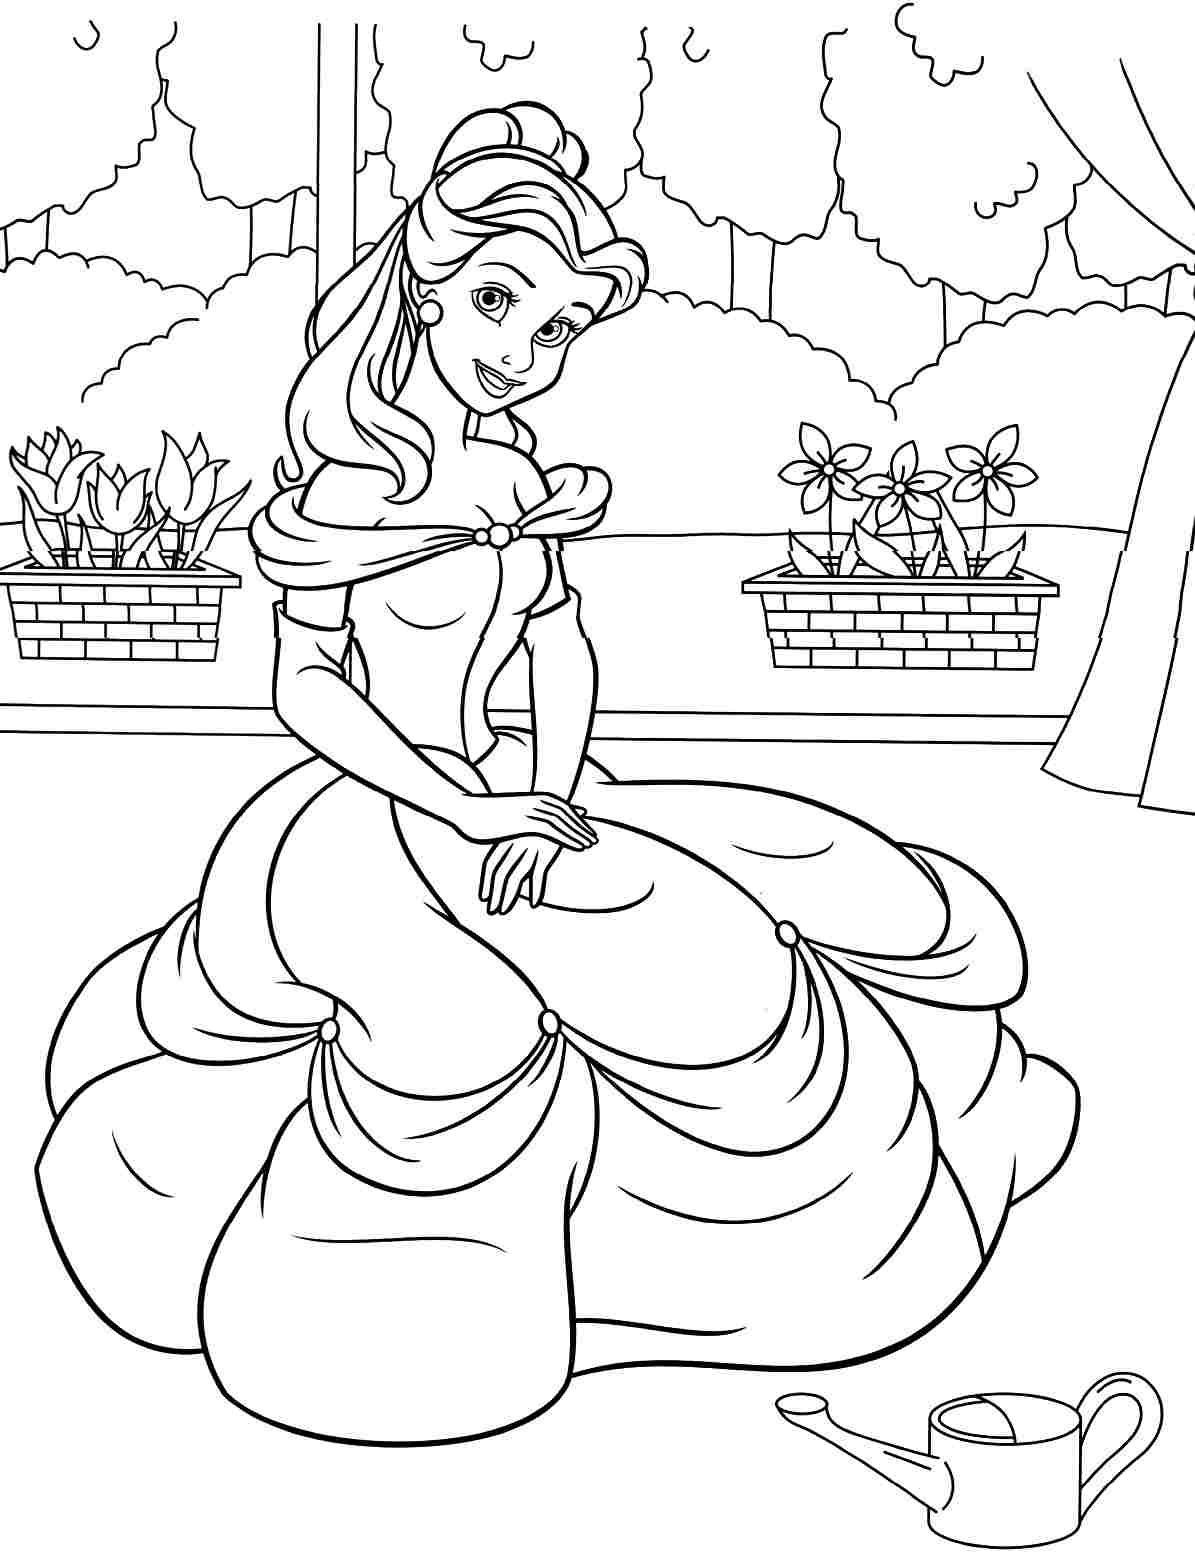 Coloring Pages For Girls Princess
 Disney Princess Belle Coloring Pages For Girls